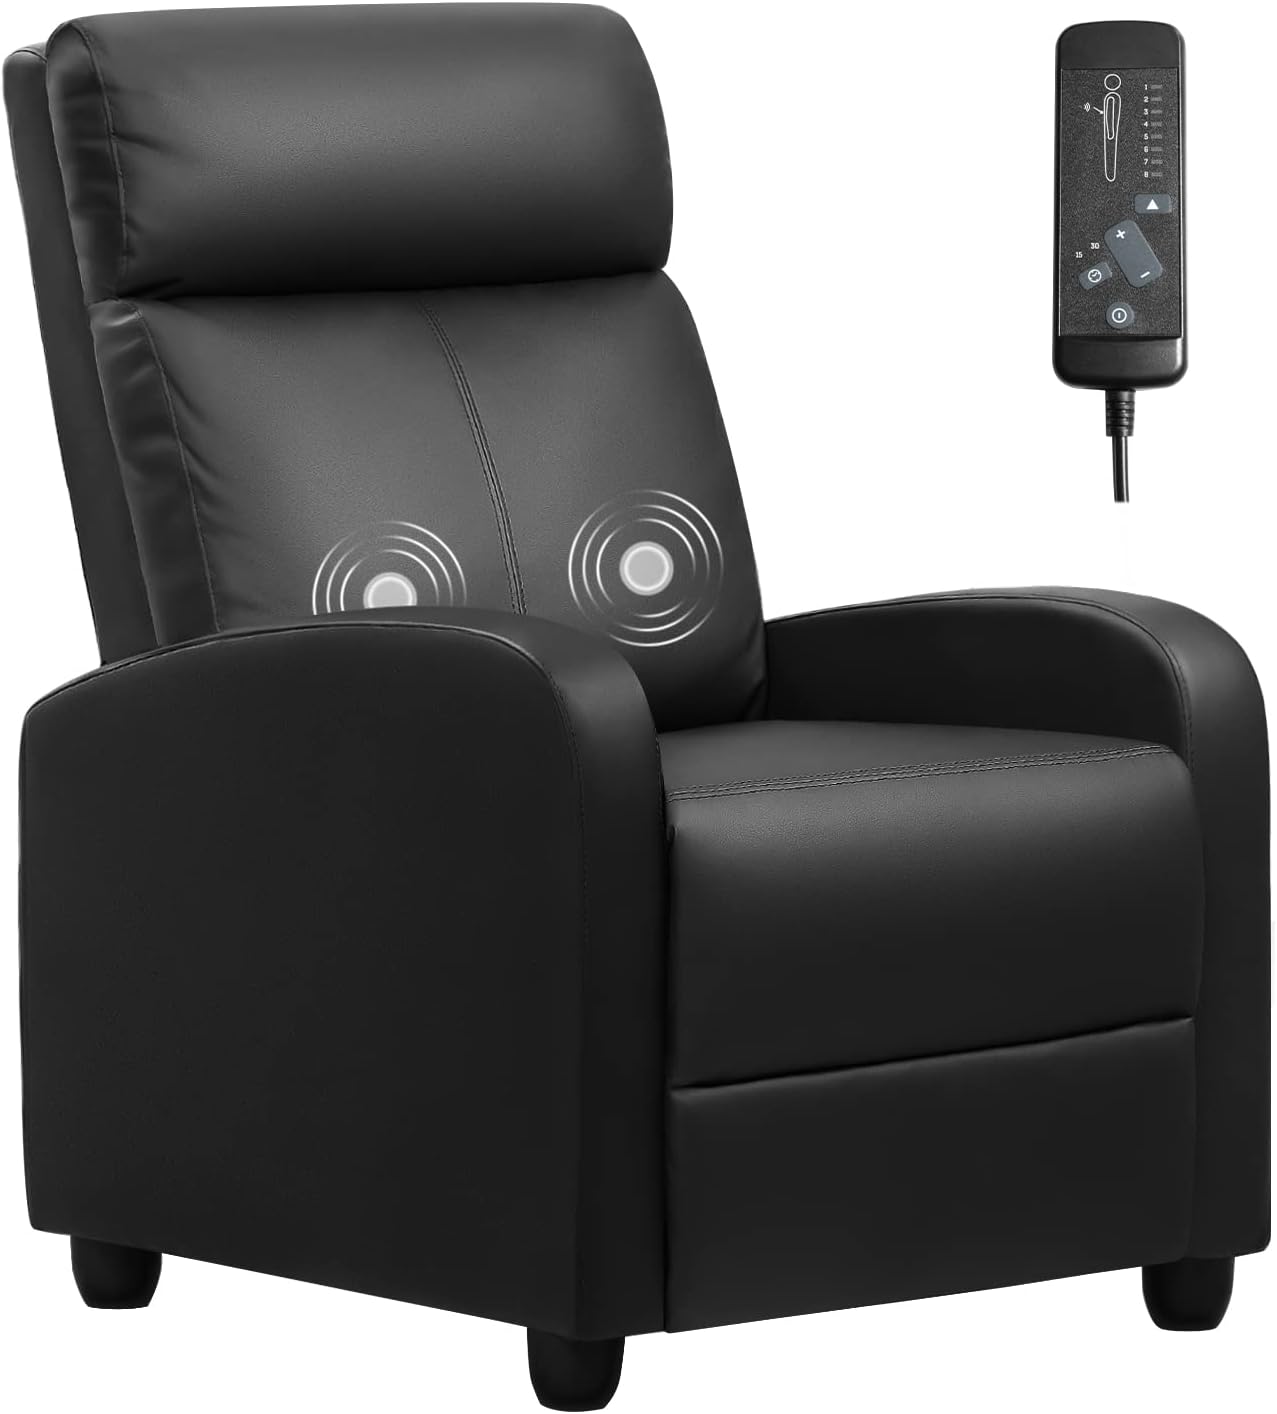 Furniwell Massage Recliner Chair for Living Room [...]